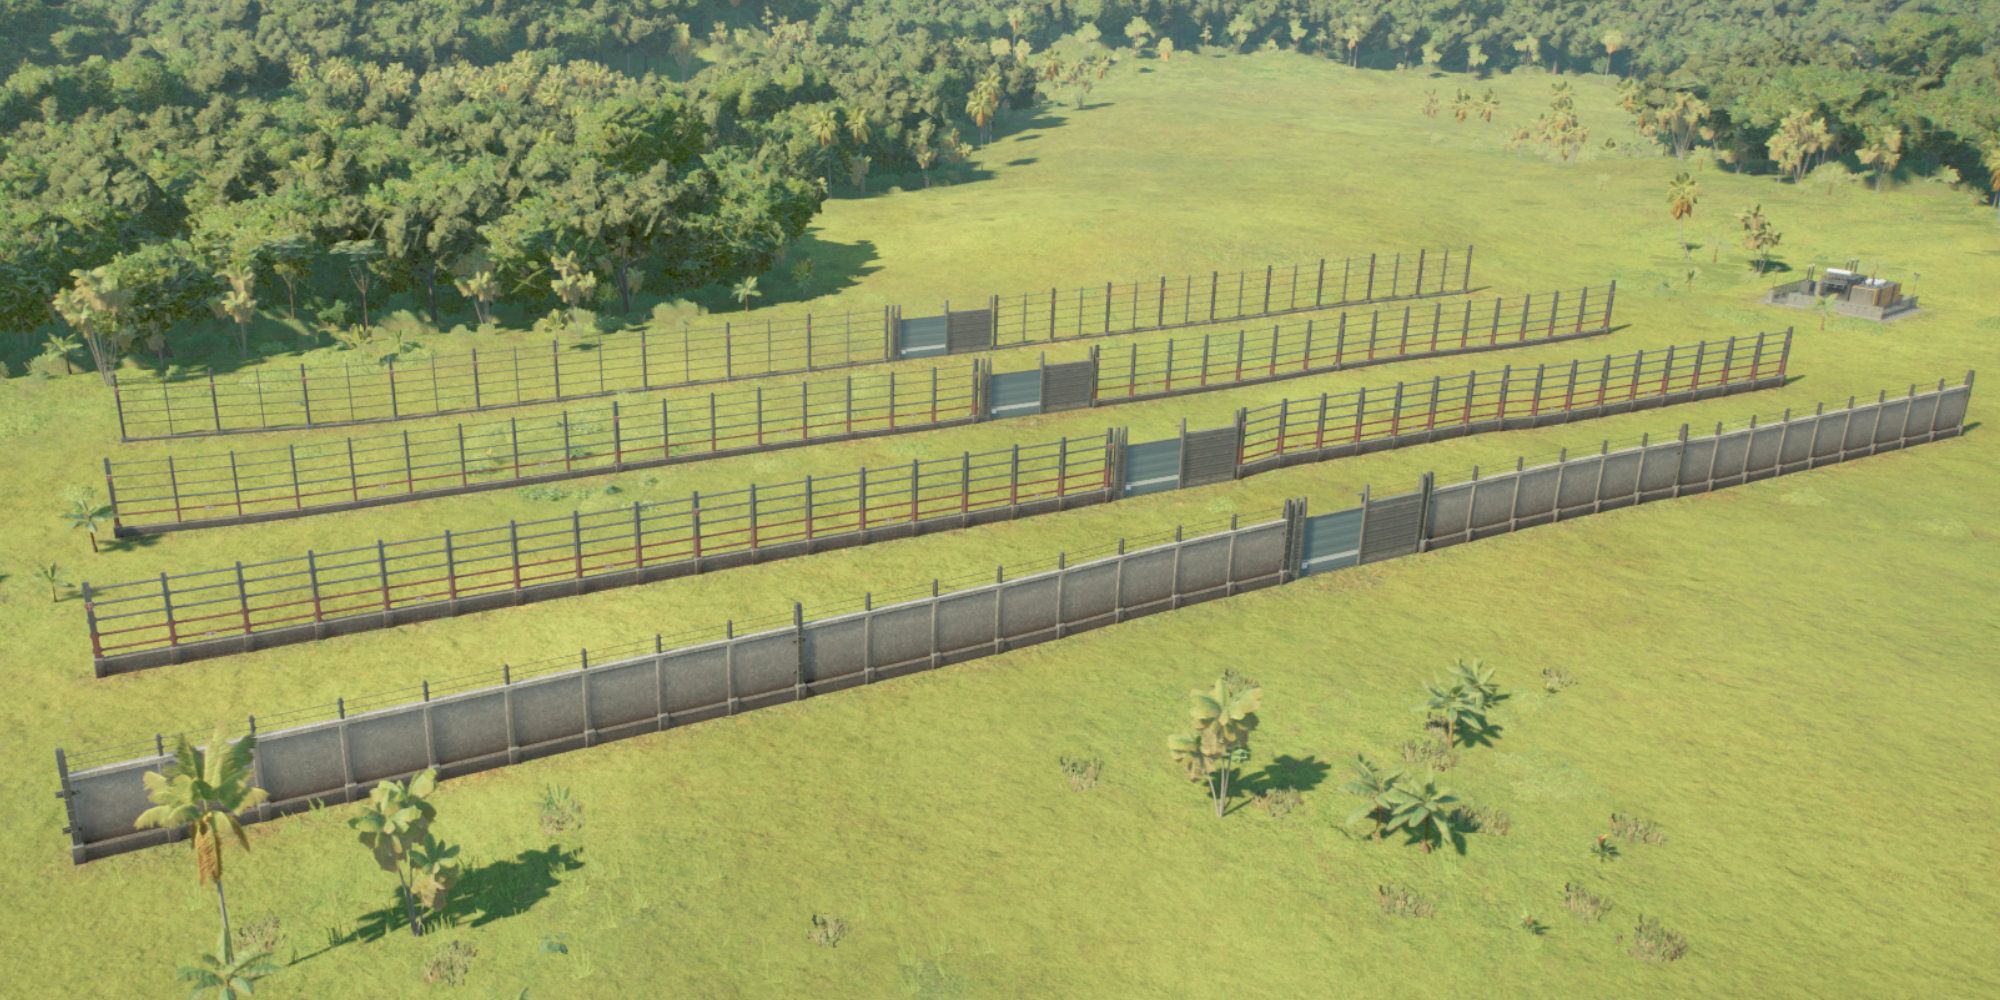 JWE2 different fence types